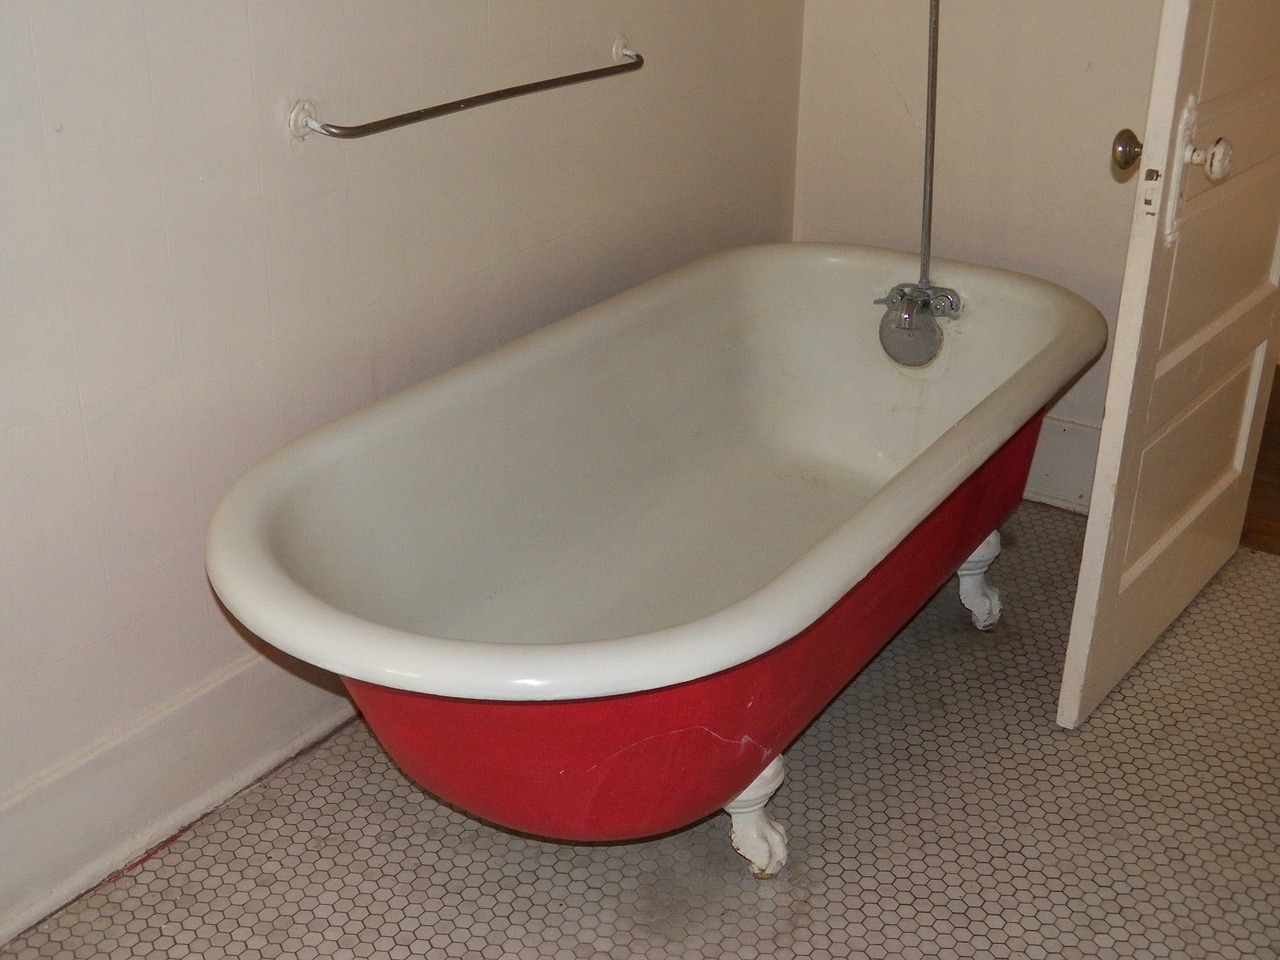 Repair A Ling Tub Terry S Plumbing, How To Fix Bathtub Surface